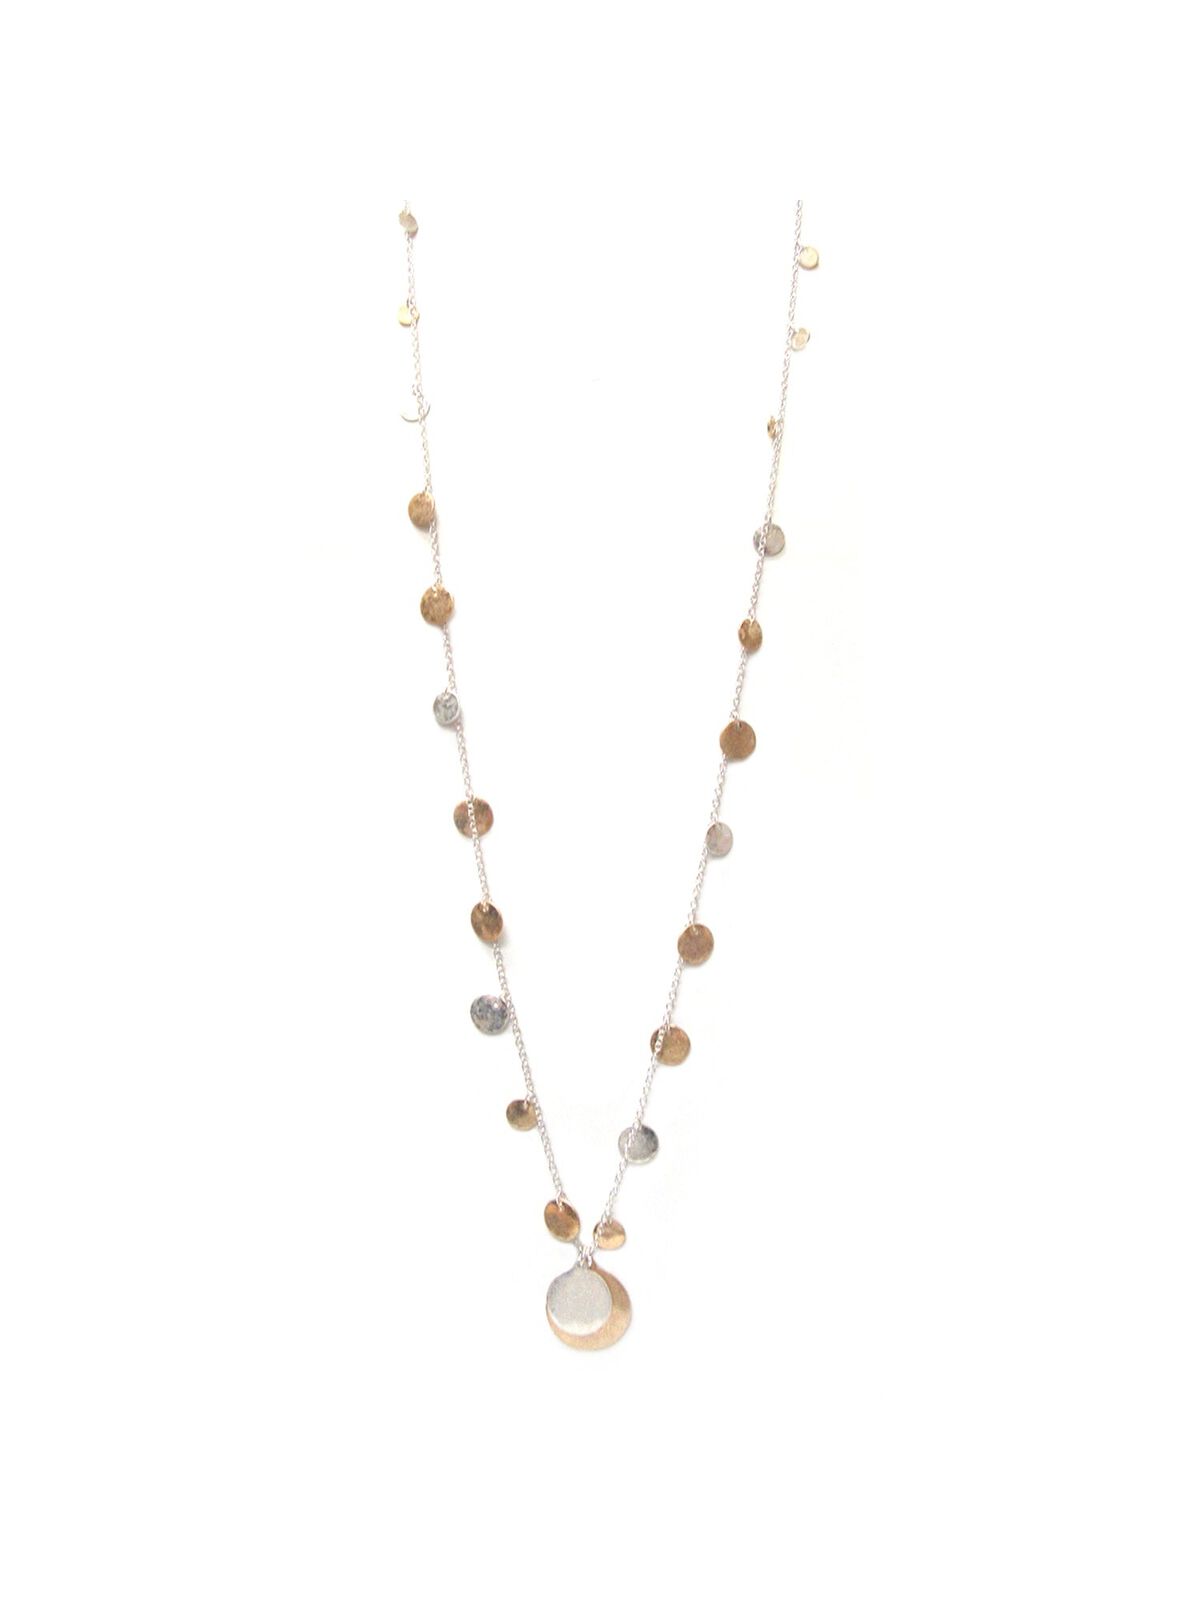 Marlyn Schiff Long Disc Necklace